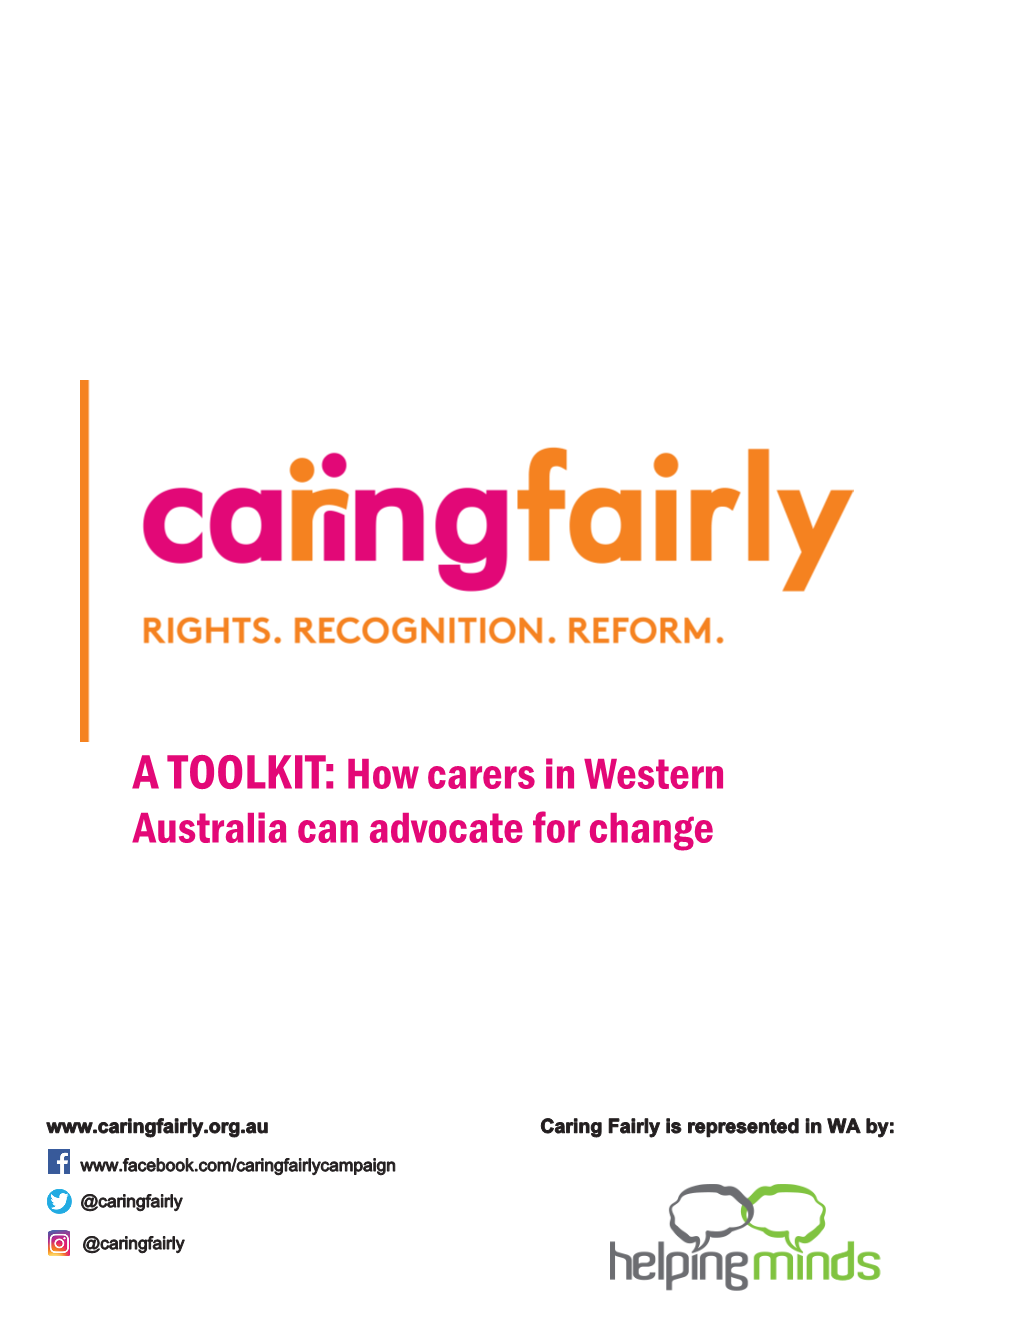 A TOOLKIT: How Carers in Western Australia Can Advocate for Change